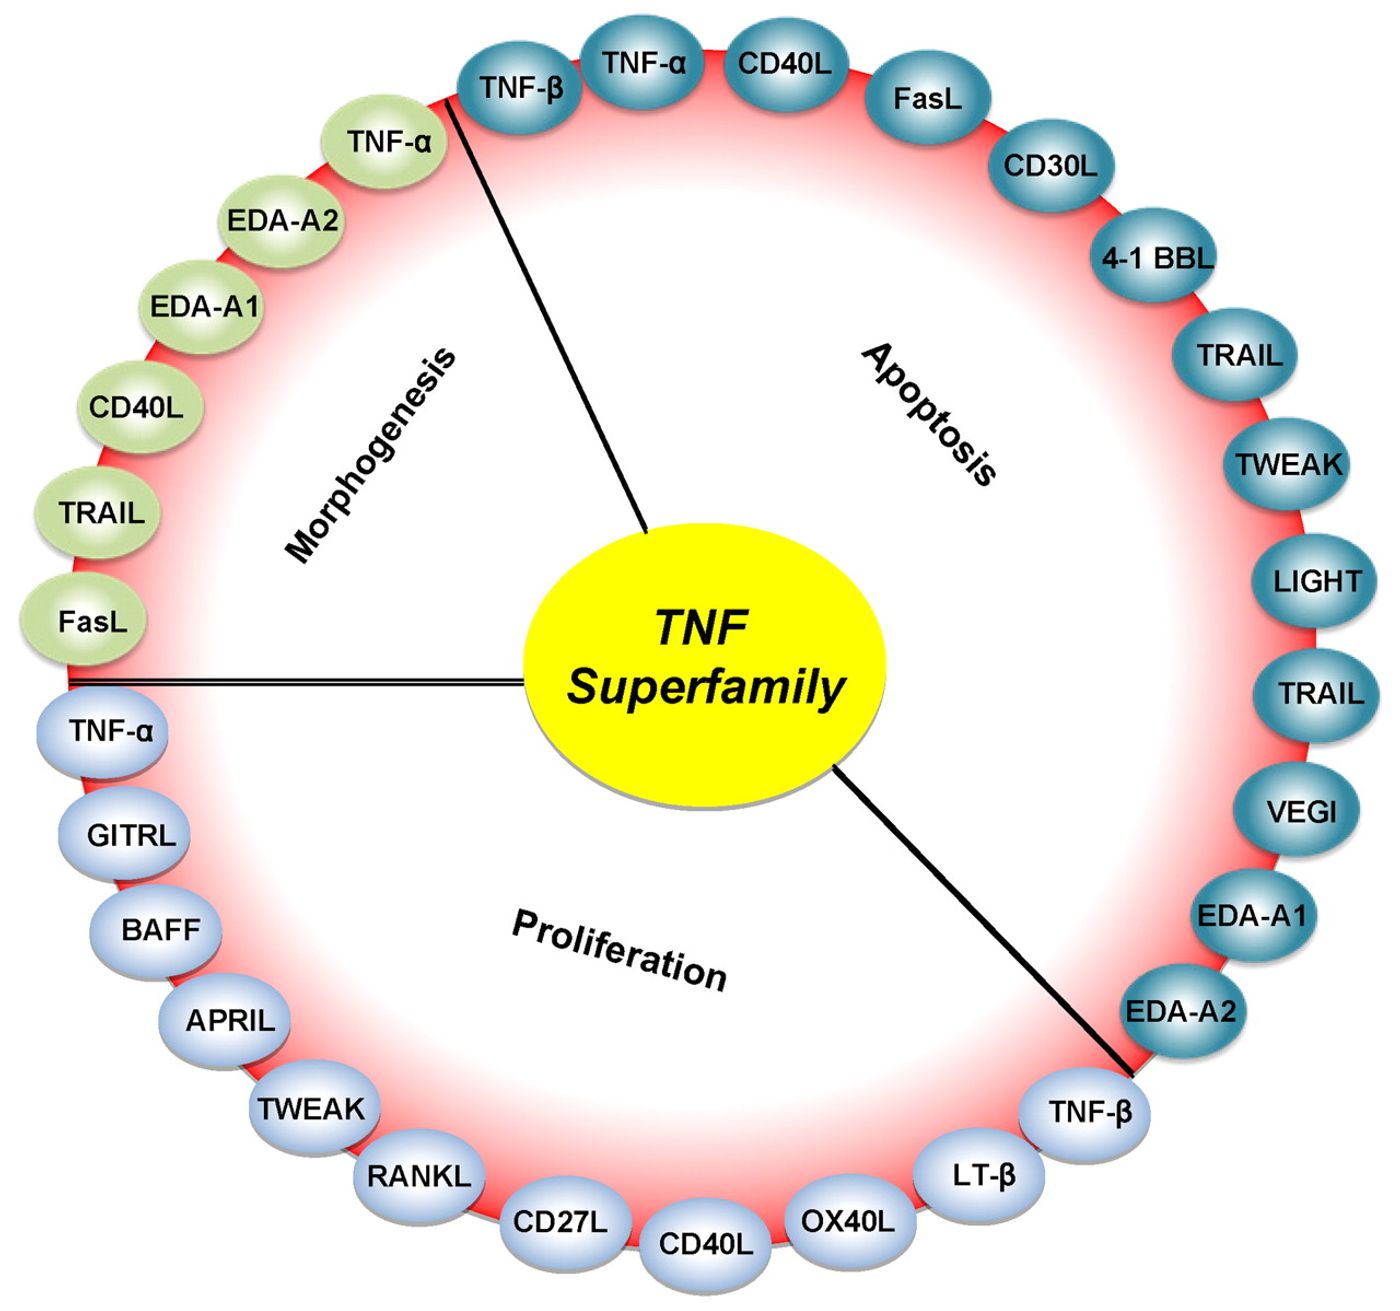 TNF plays a role in several different functions.